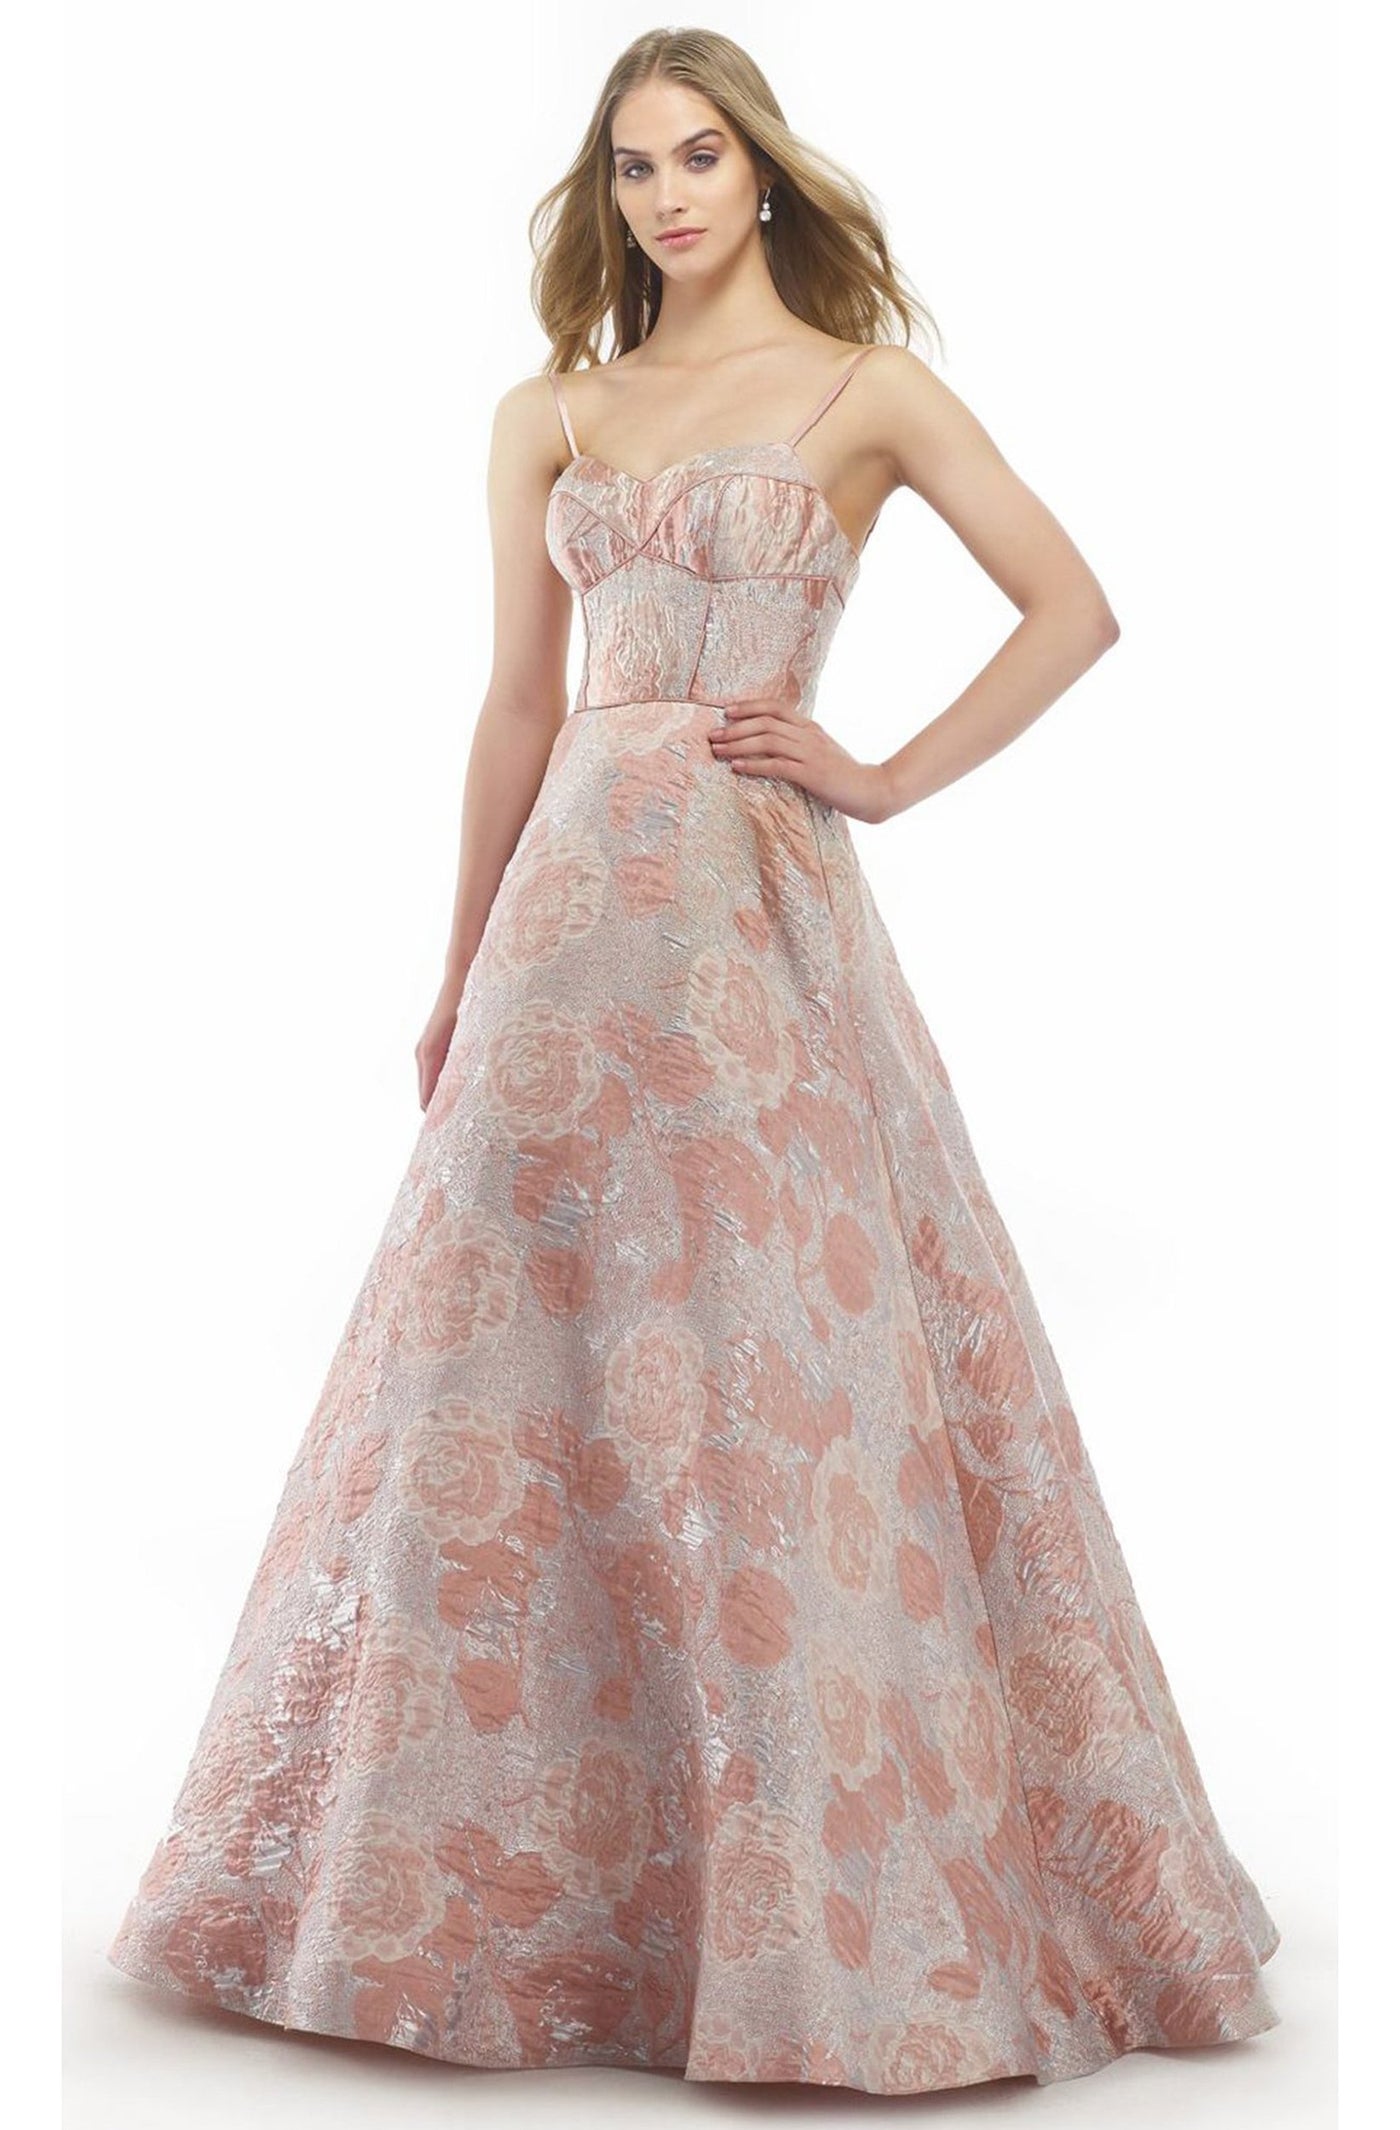 Morrell Maxie - 15813 Floral Embellished Sweetheart Ballgown in Pink and Silver